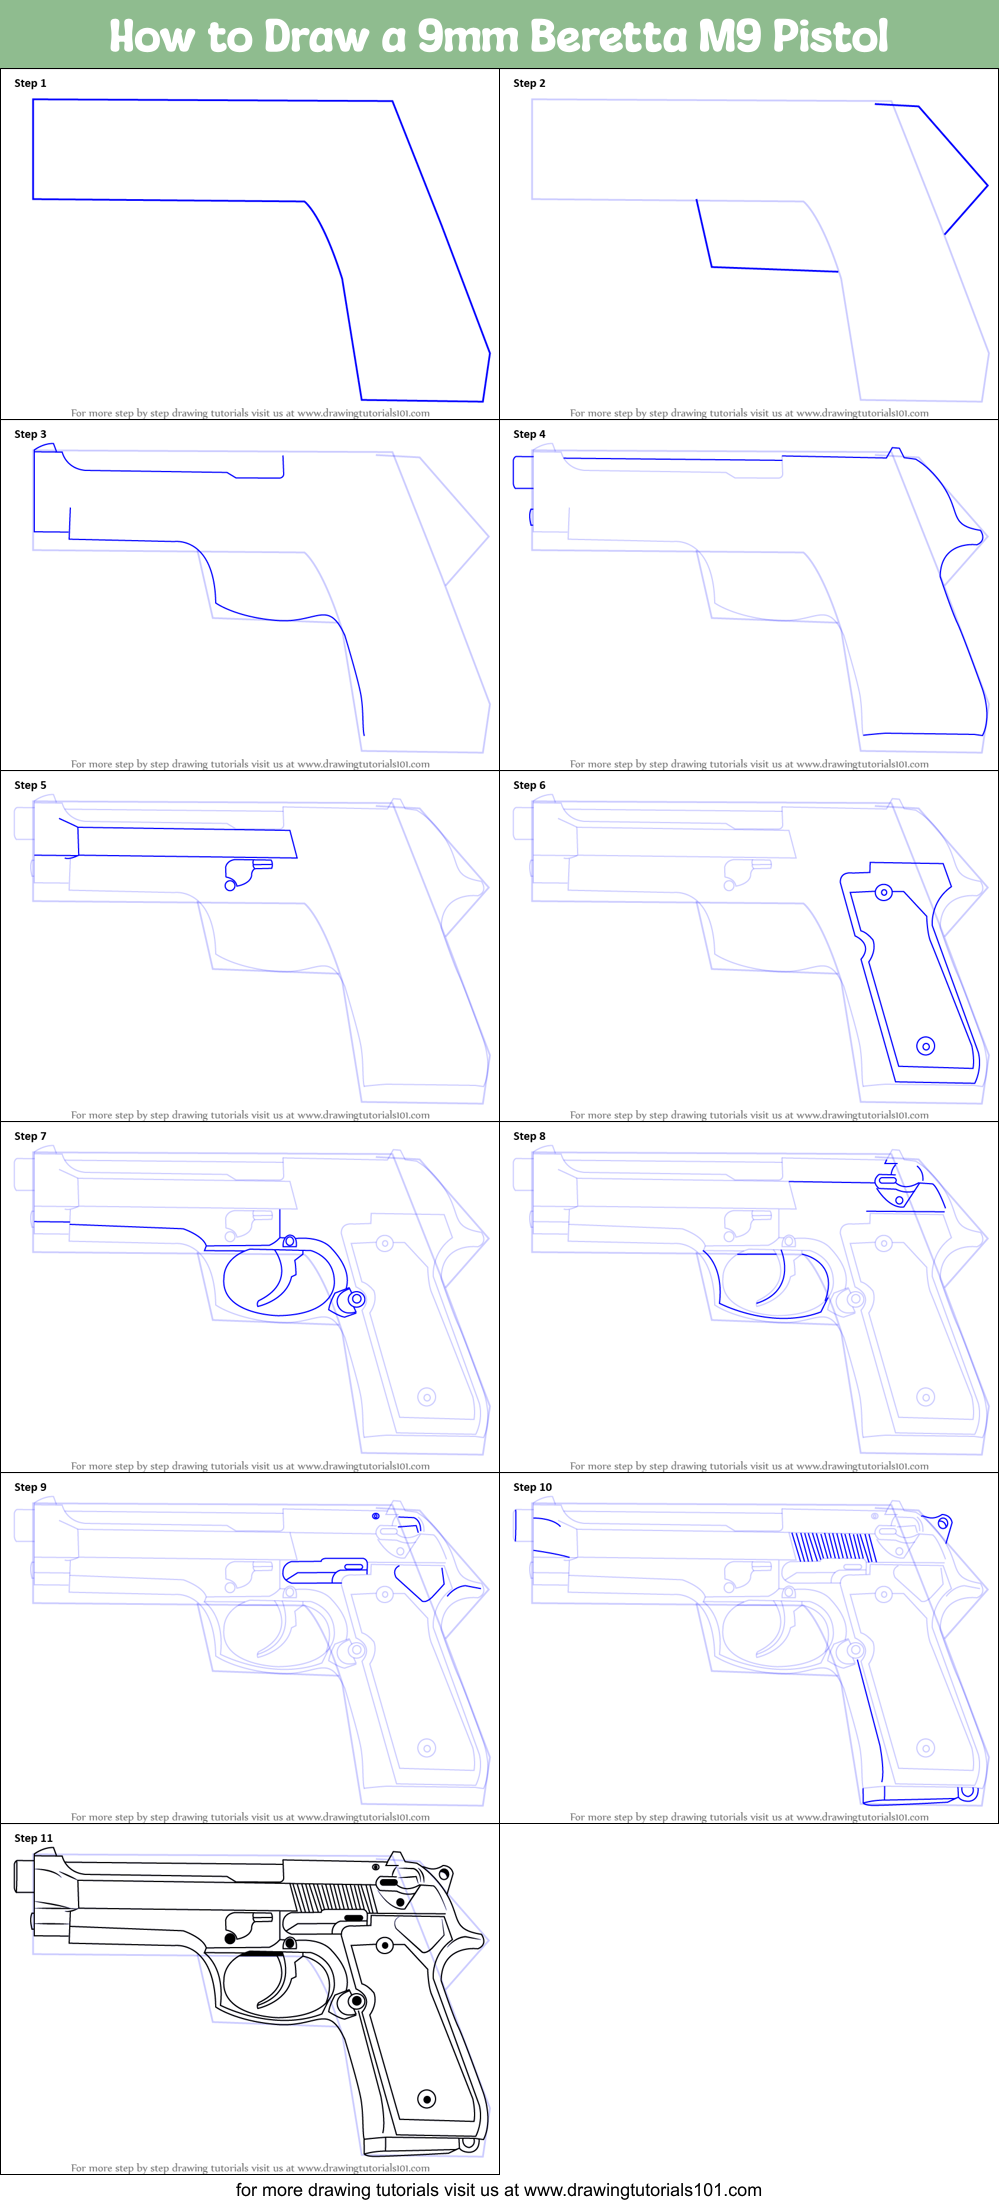 How to Draw a 9mm Beretta M9 Pistol printable step by step drawing